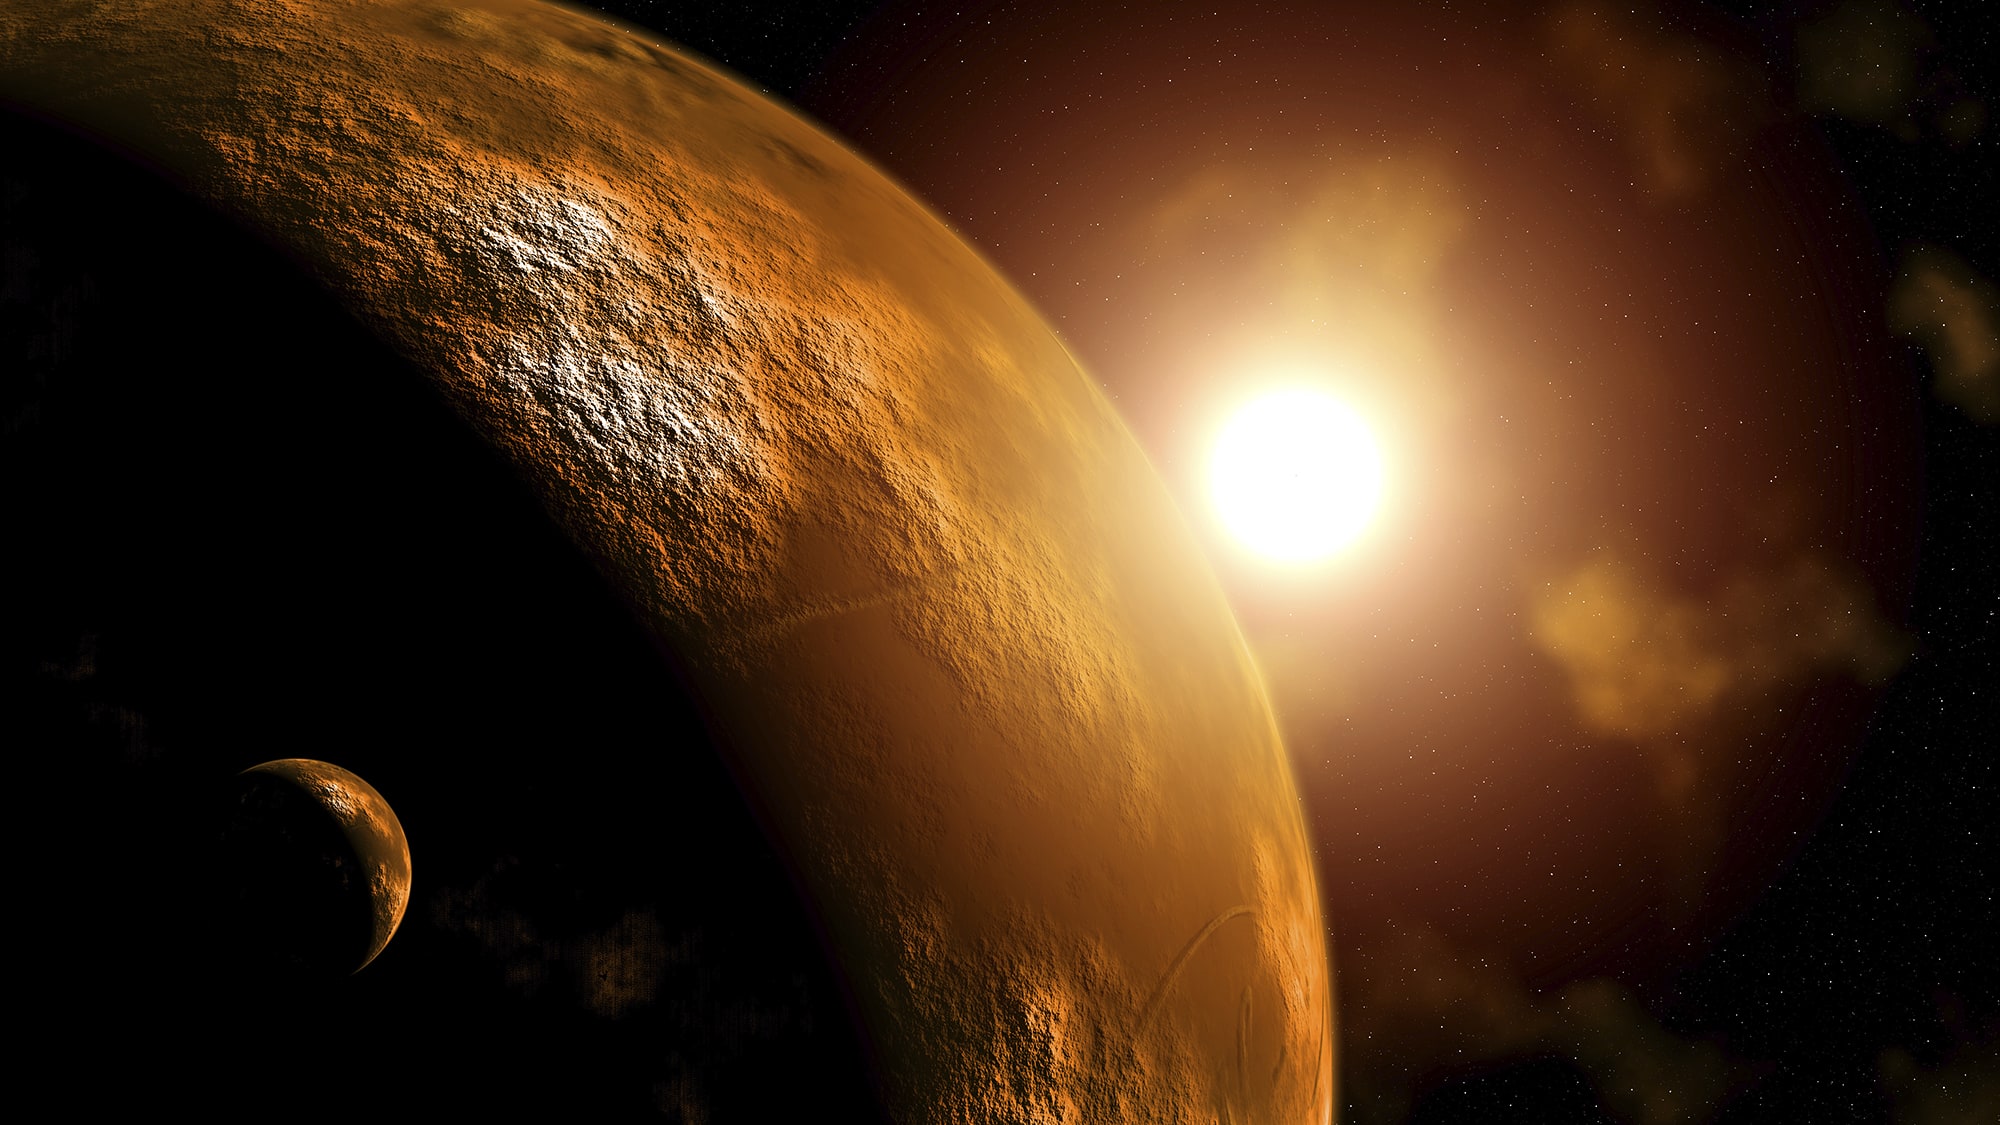 Space flight faces roadblocks on the way to Mars